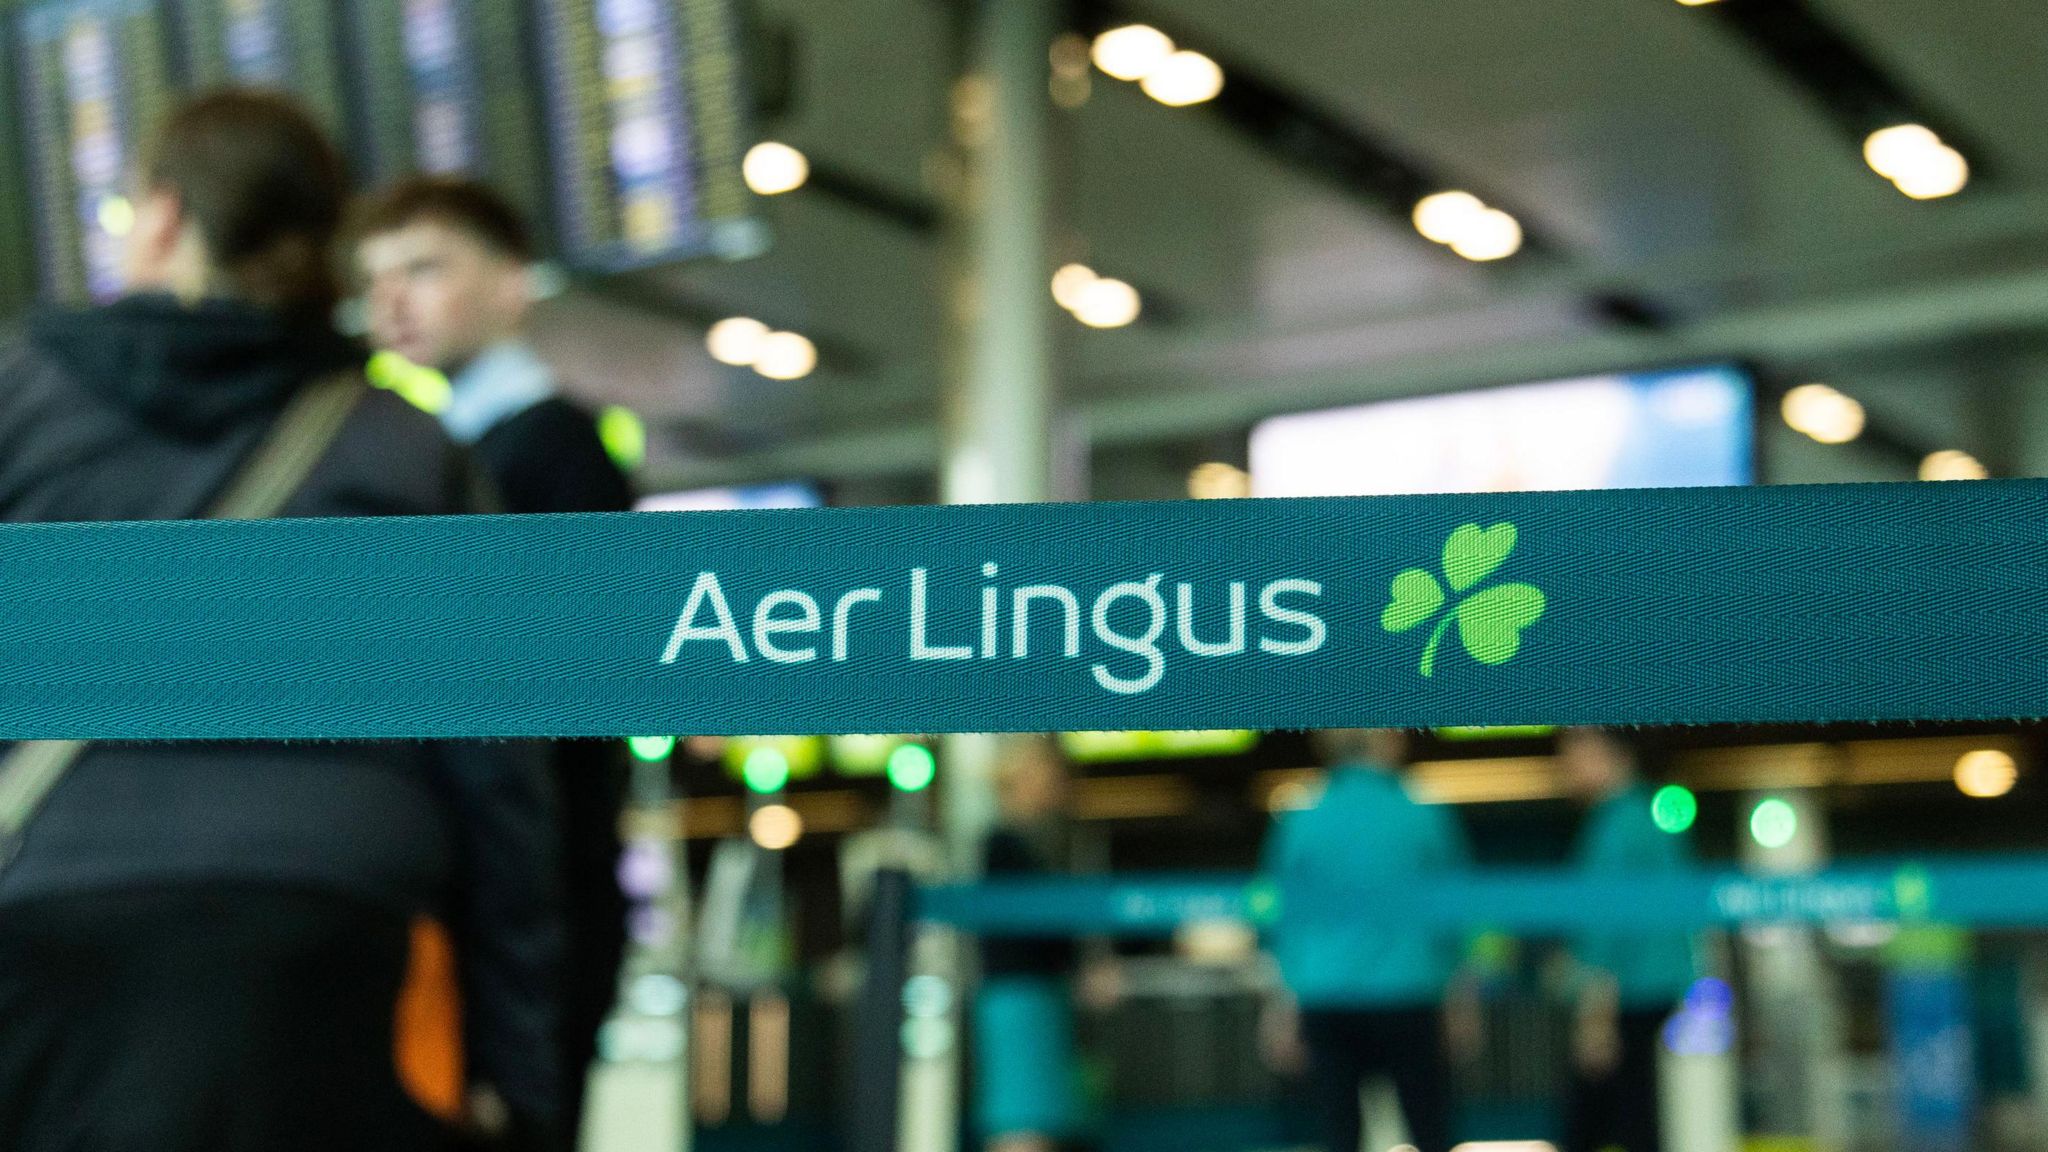 Aer Lingus check-in desk at airport 